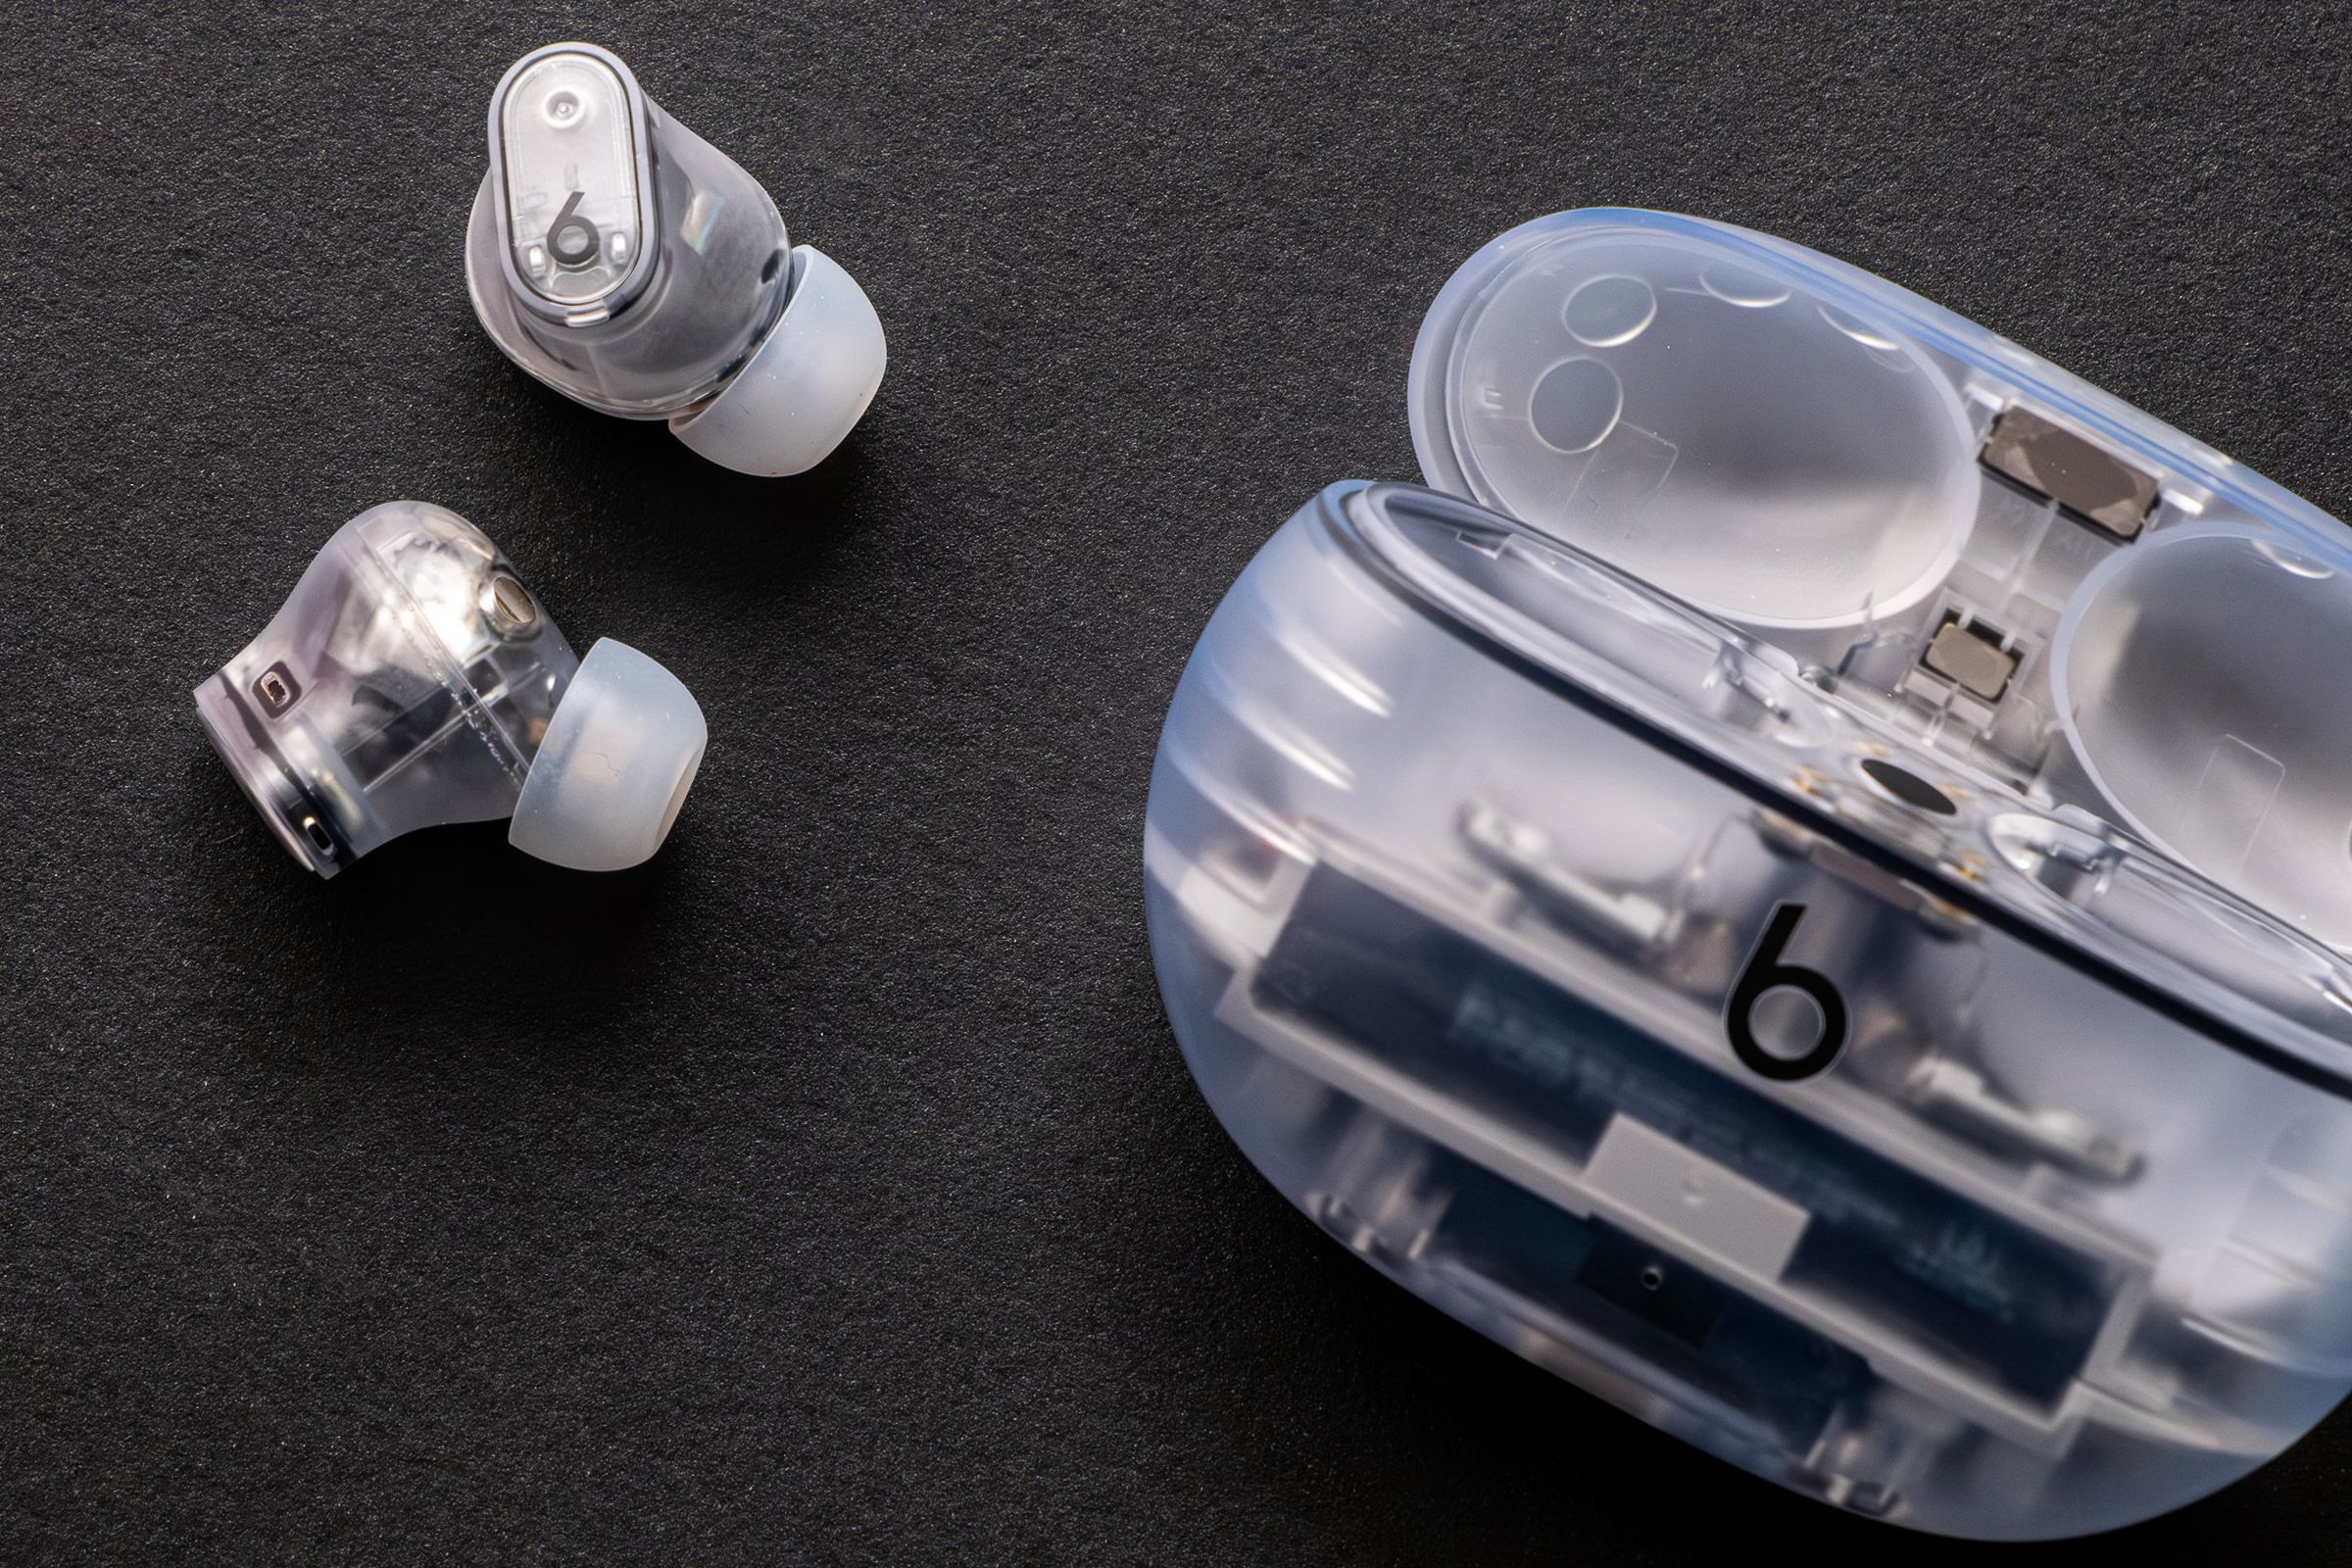 The see-through Beats Studio Buds Plus and their matching charging case, against a black background.